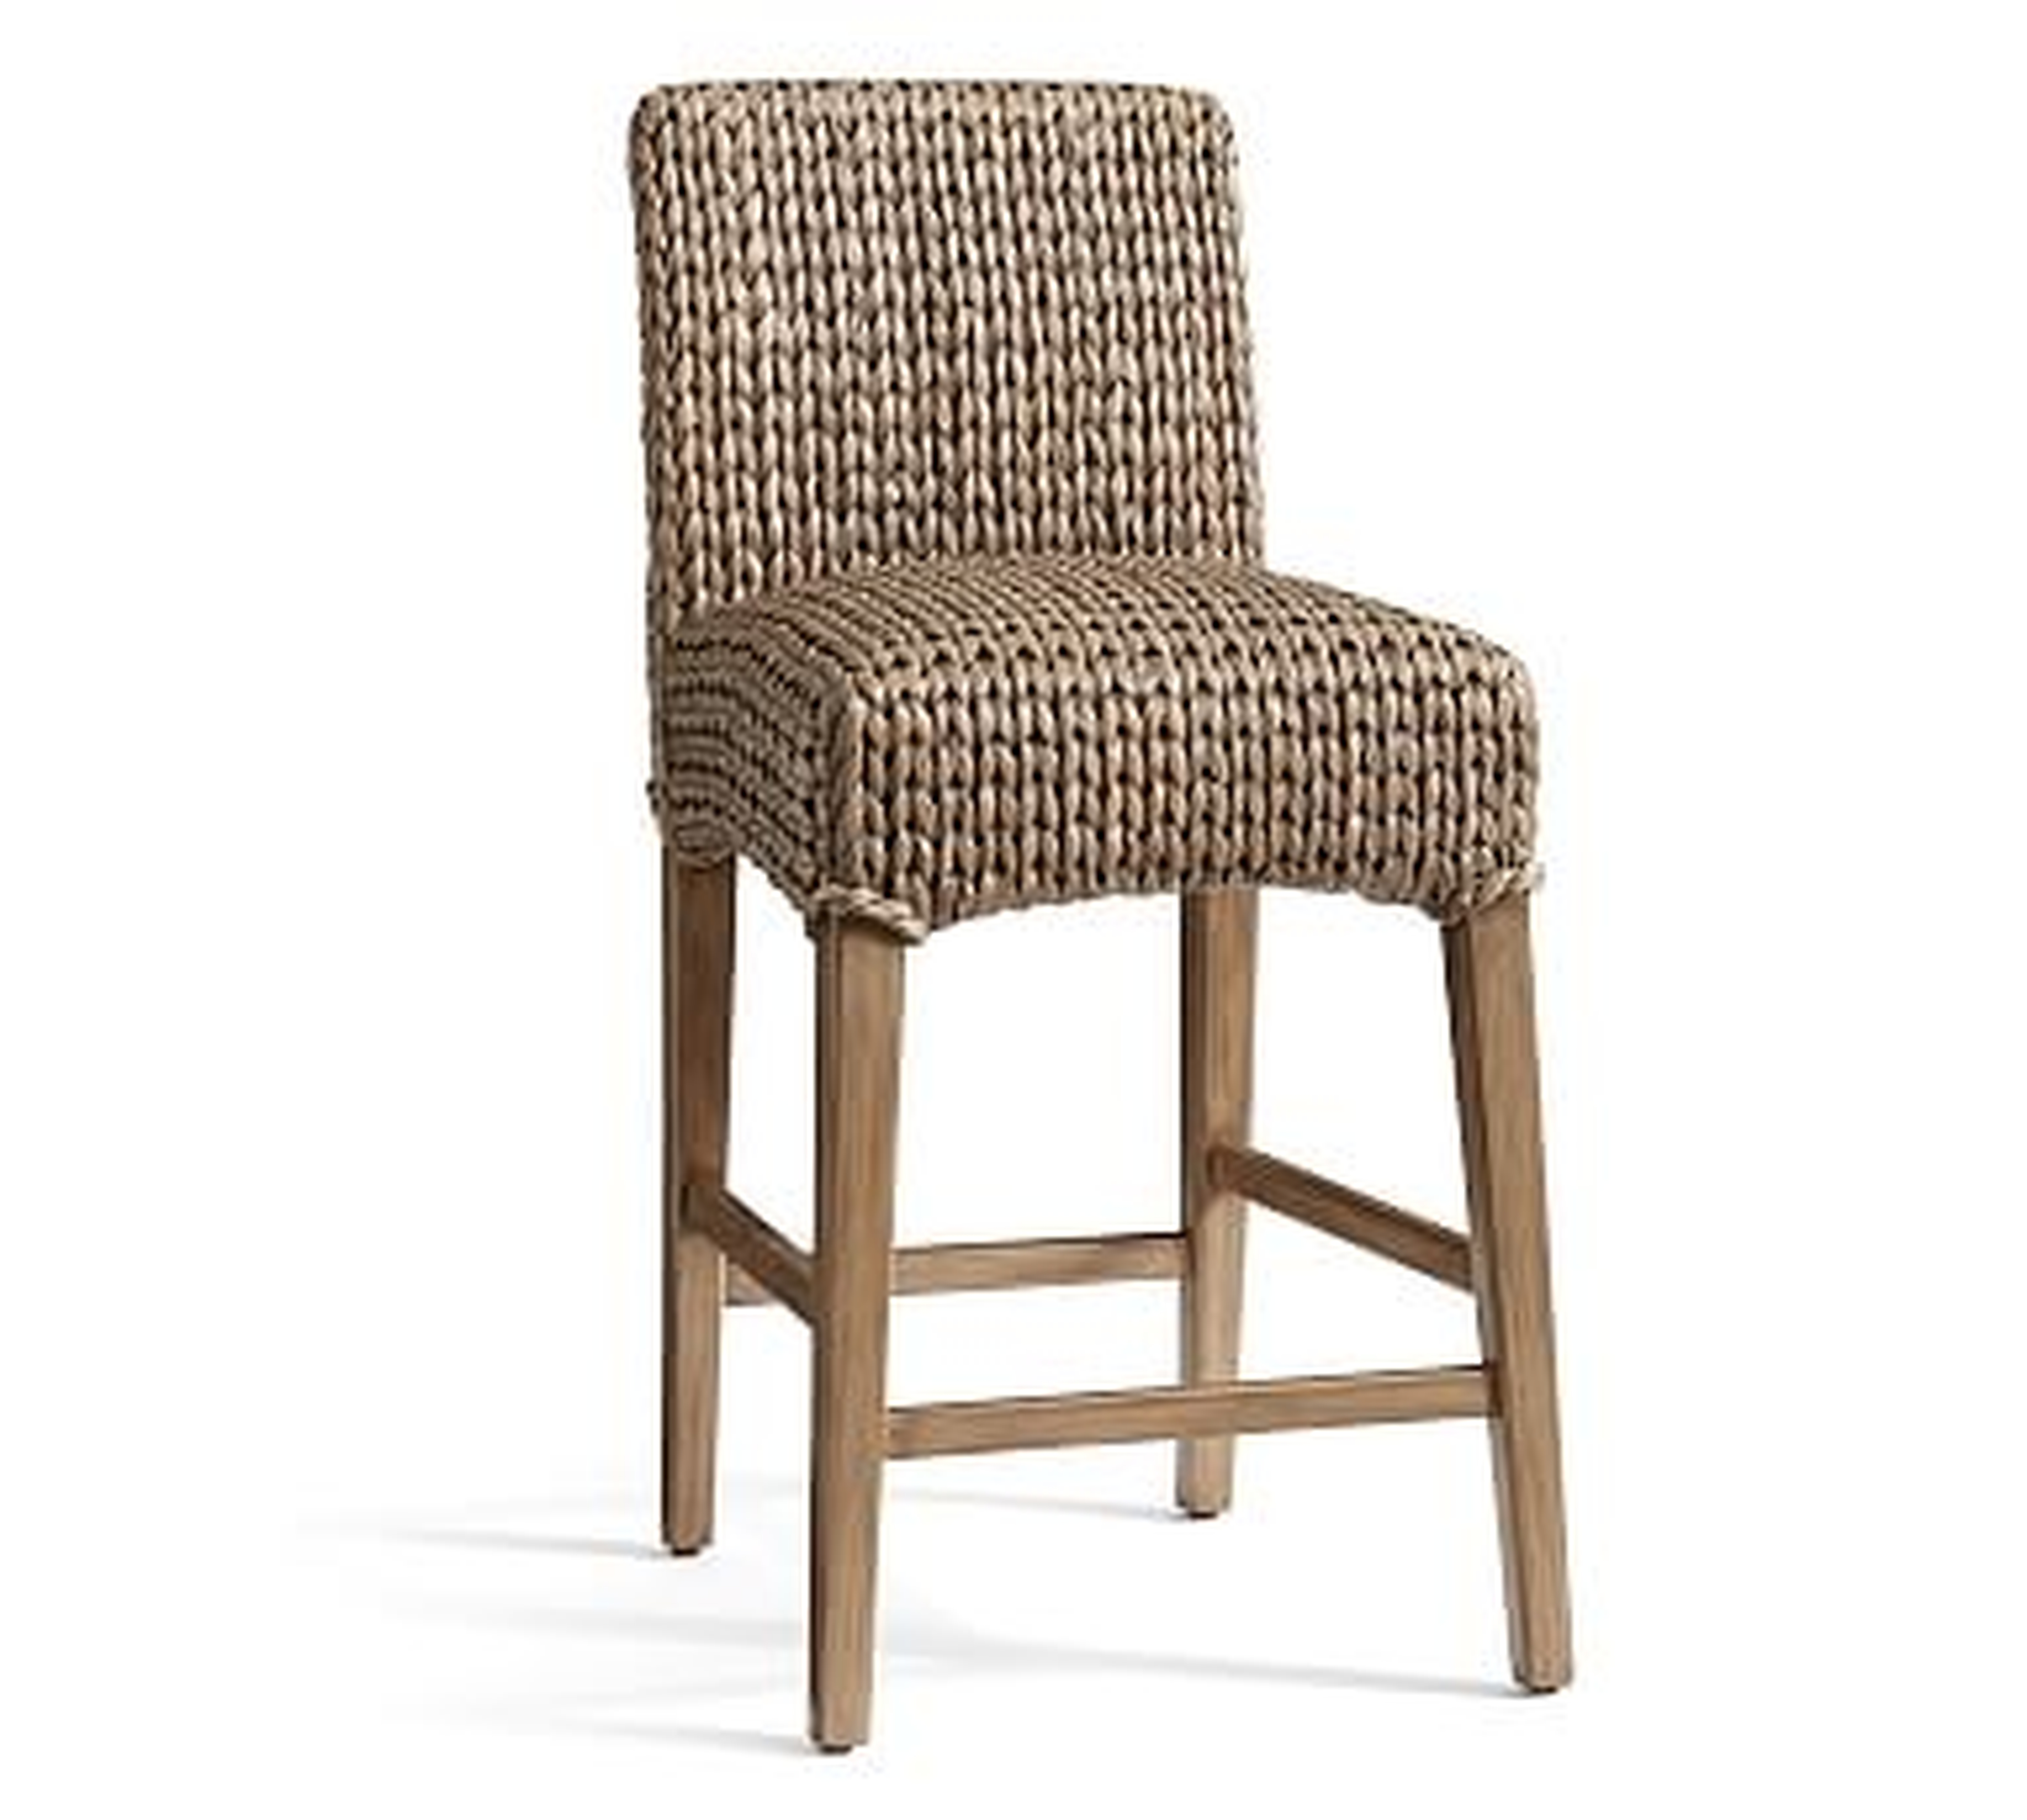 Seagrass Barstool, Counter Height, Gray Wash - Pottery Barn